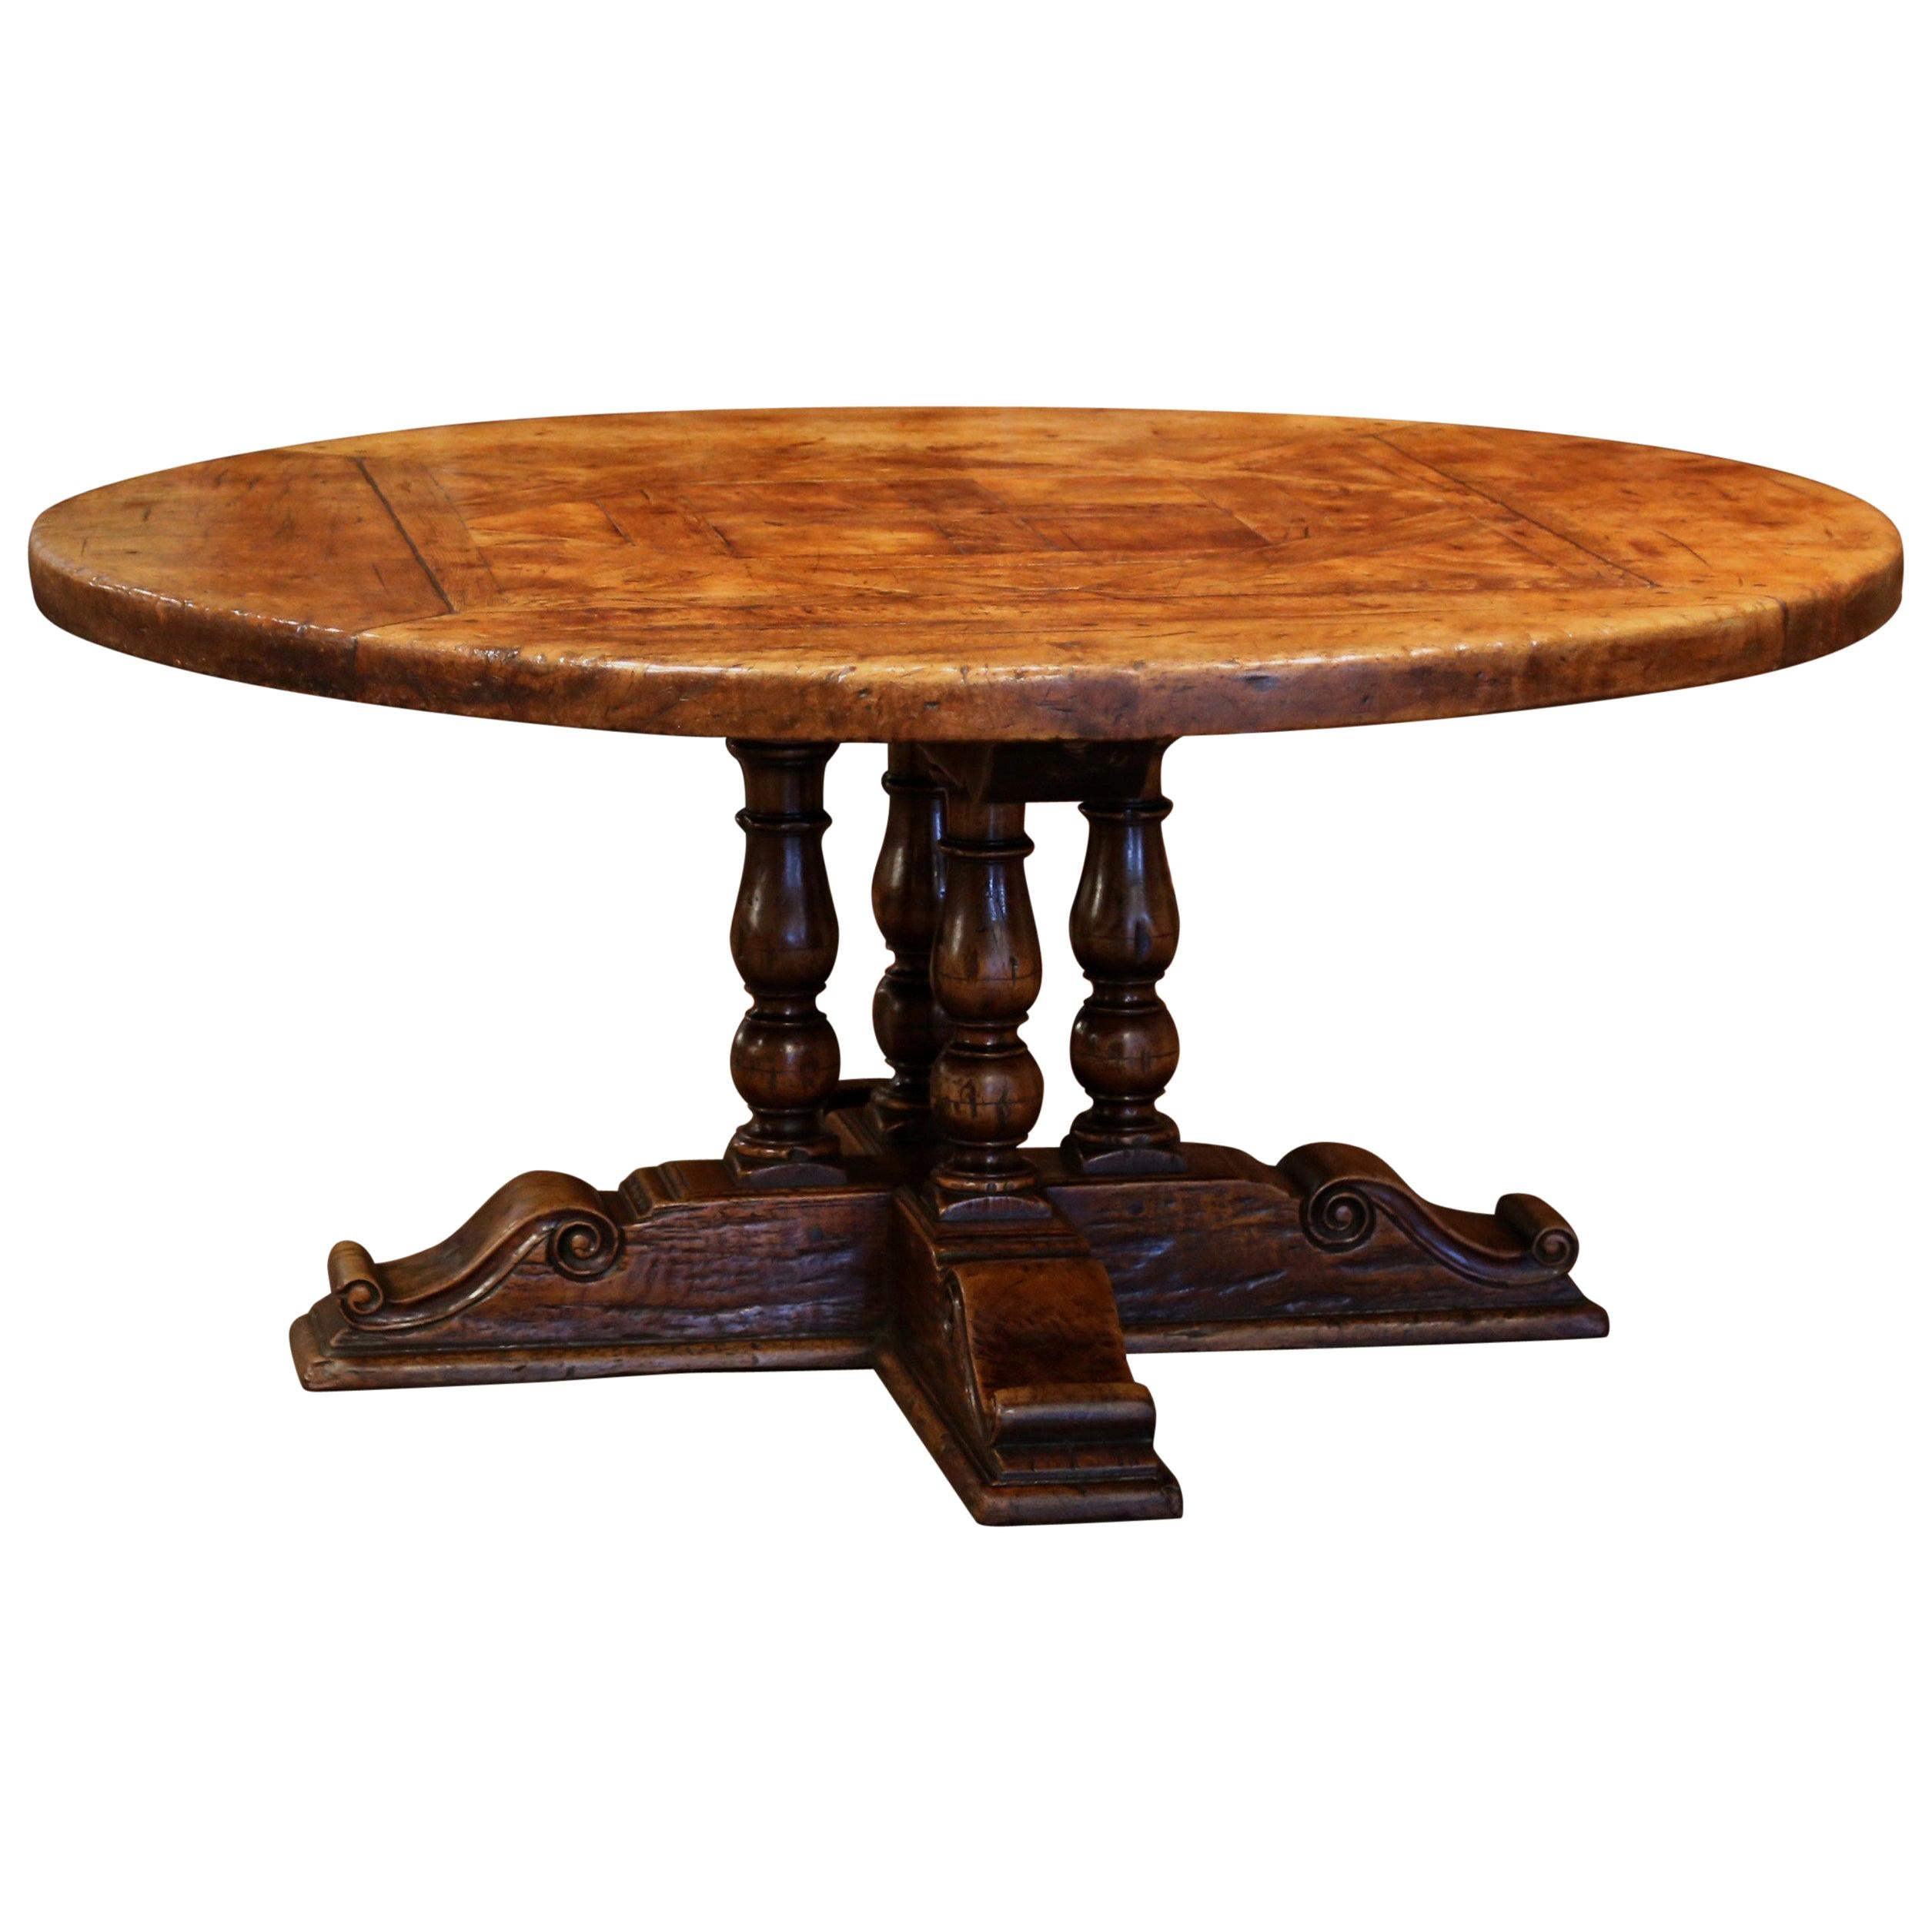 Midcentury French Carved Walnut Pedestal Round Dining Table with Parquetry Top